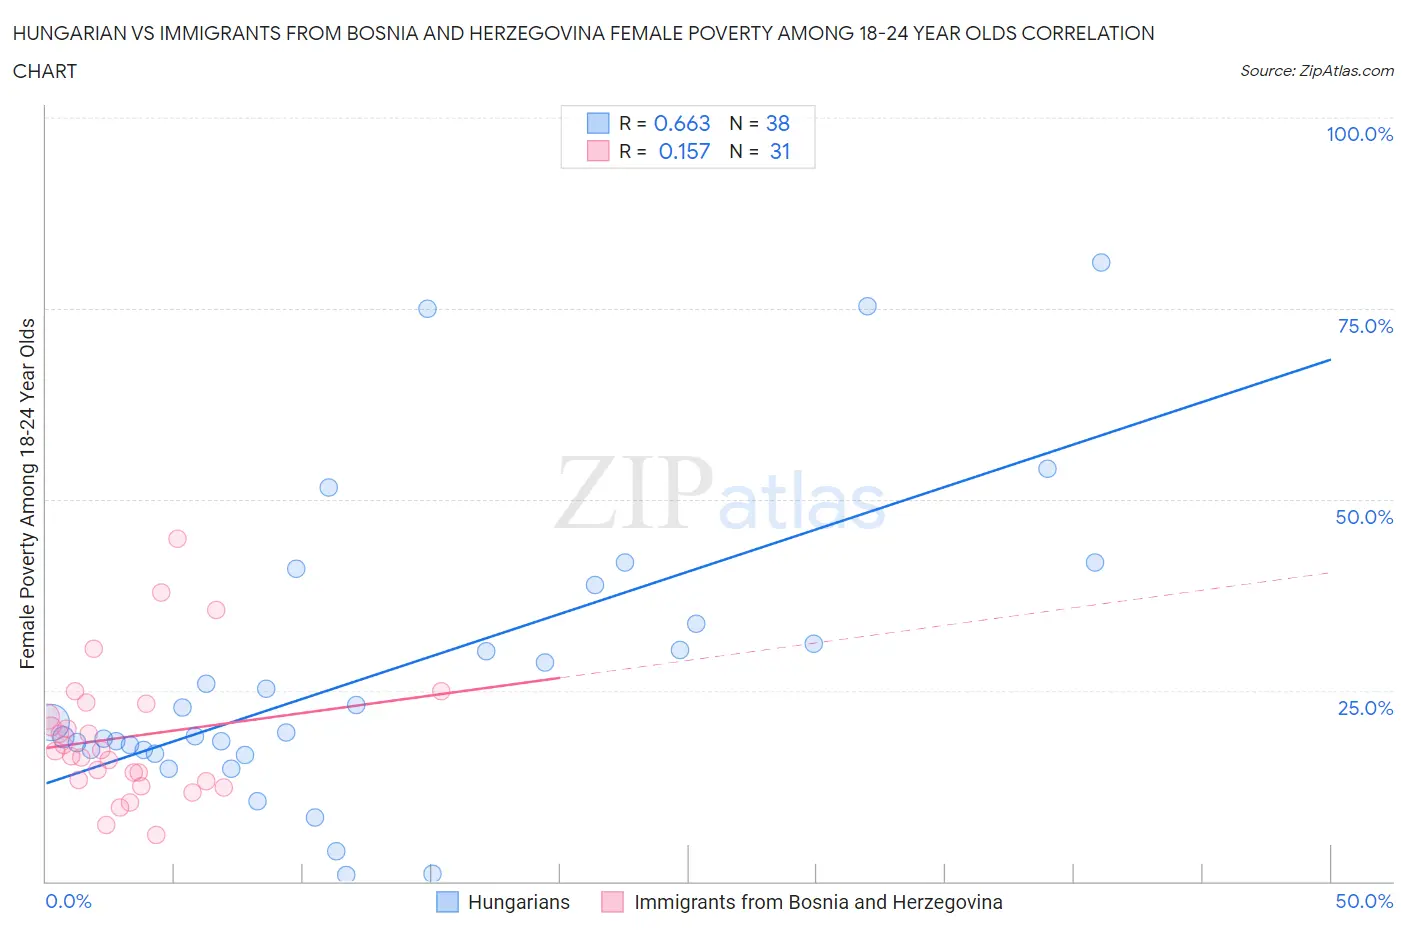 Hungarian vs Immigrants from Bosnia and Herzegovina Female Poverty Among 18-24 Year Olds